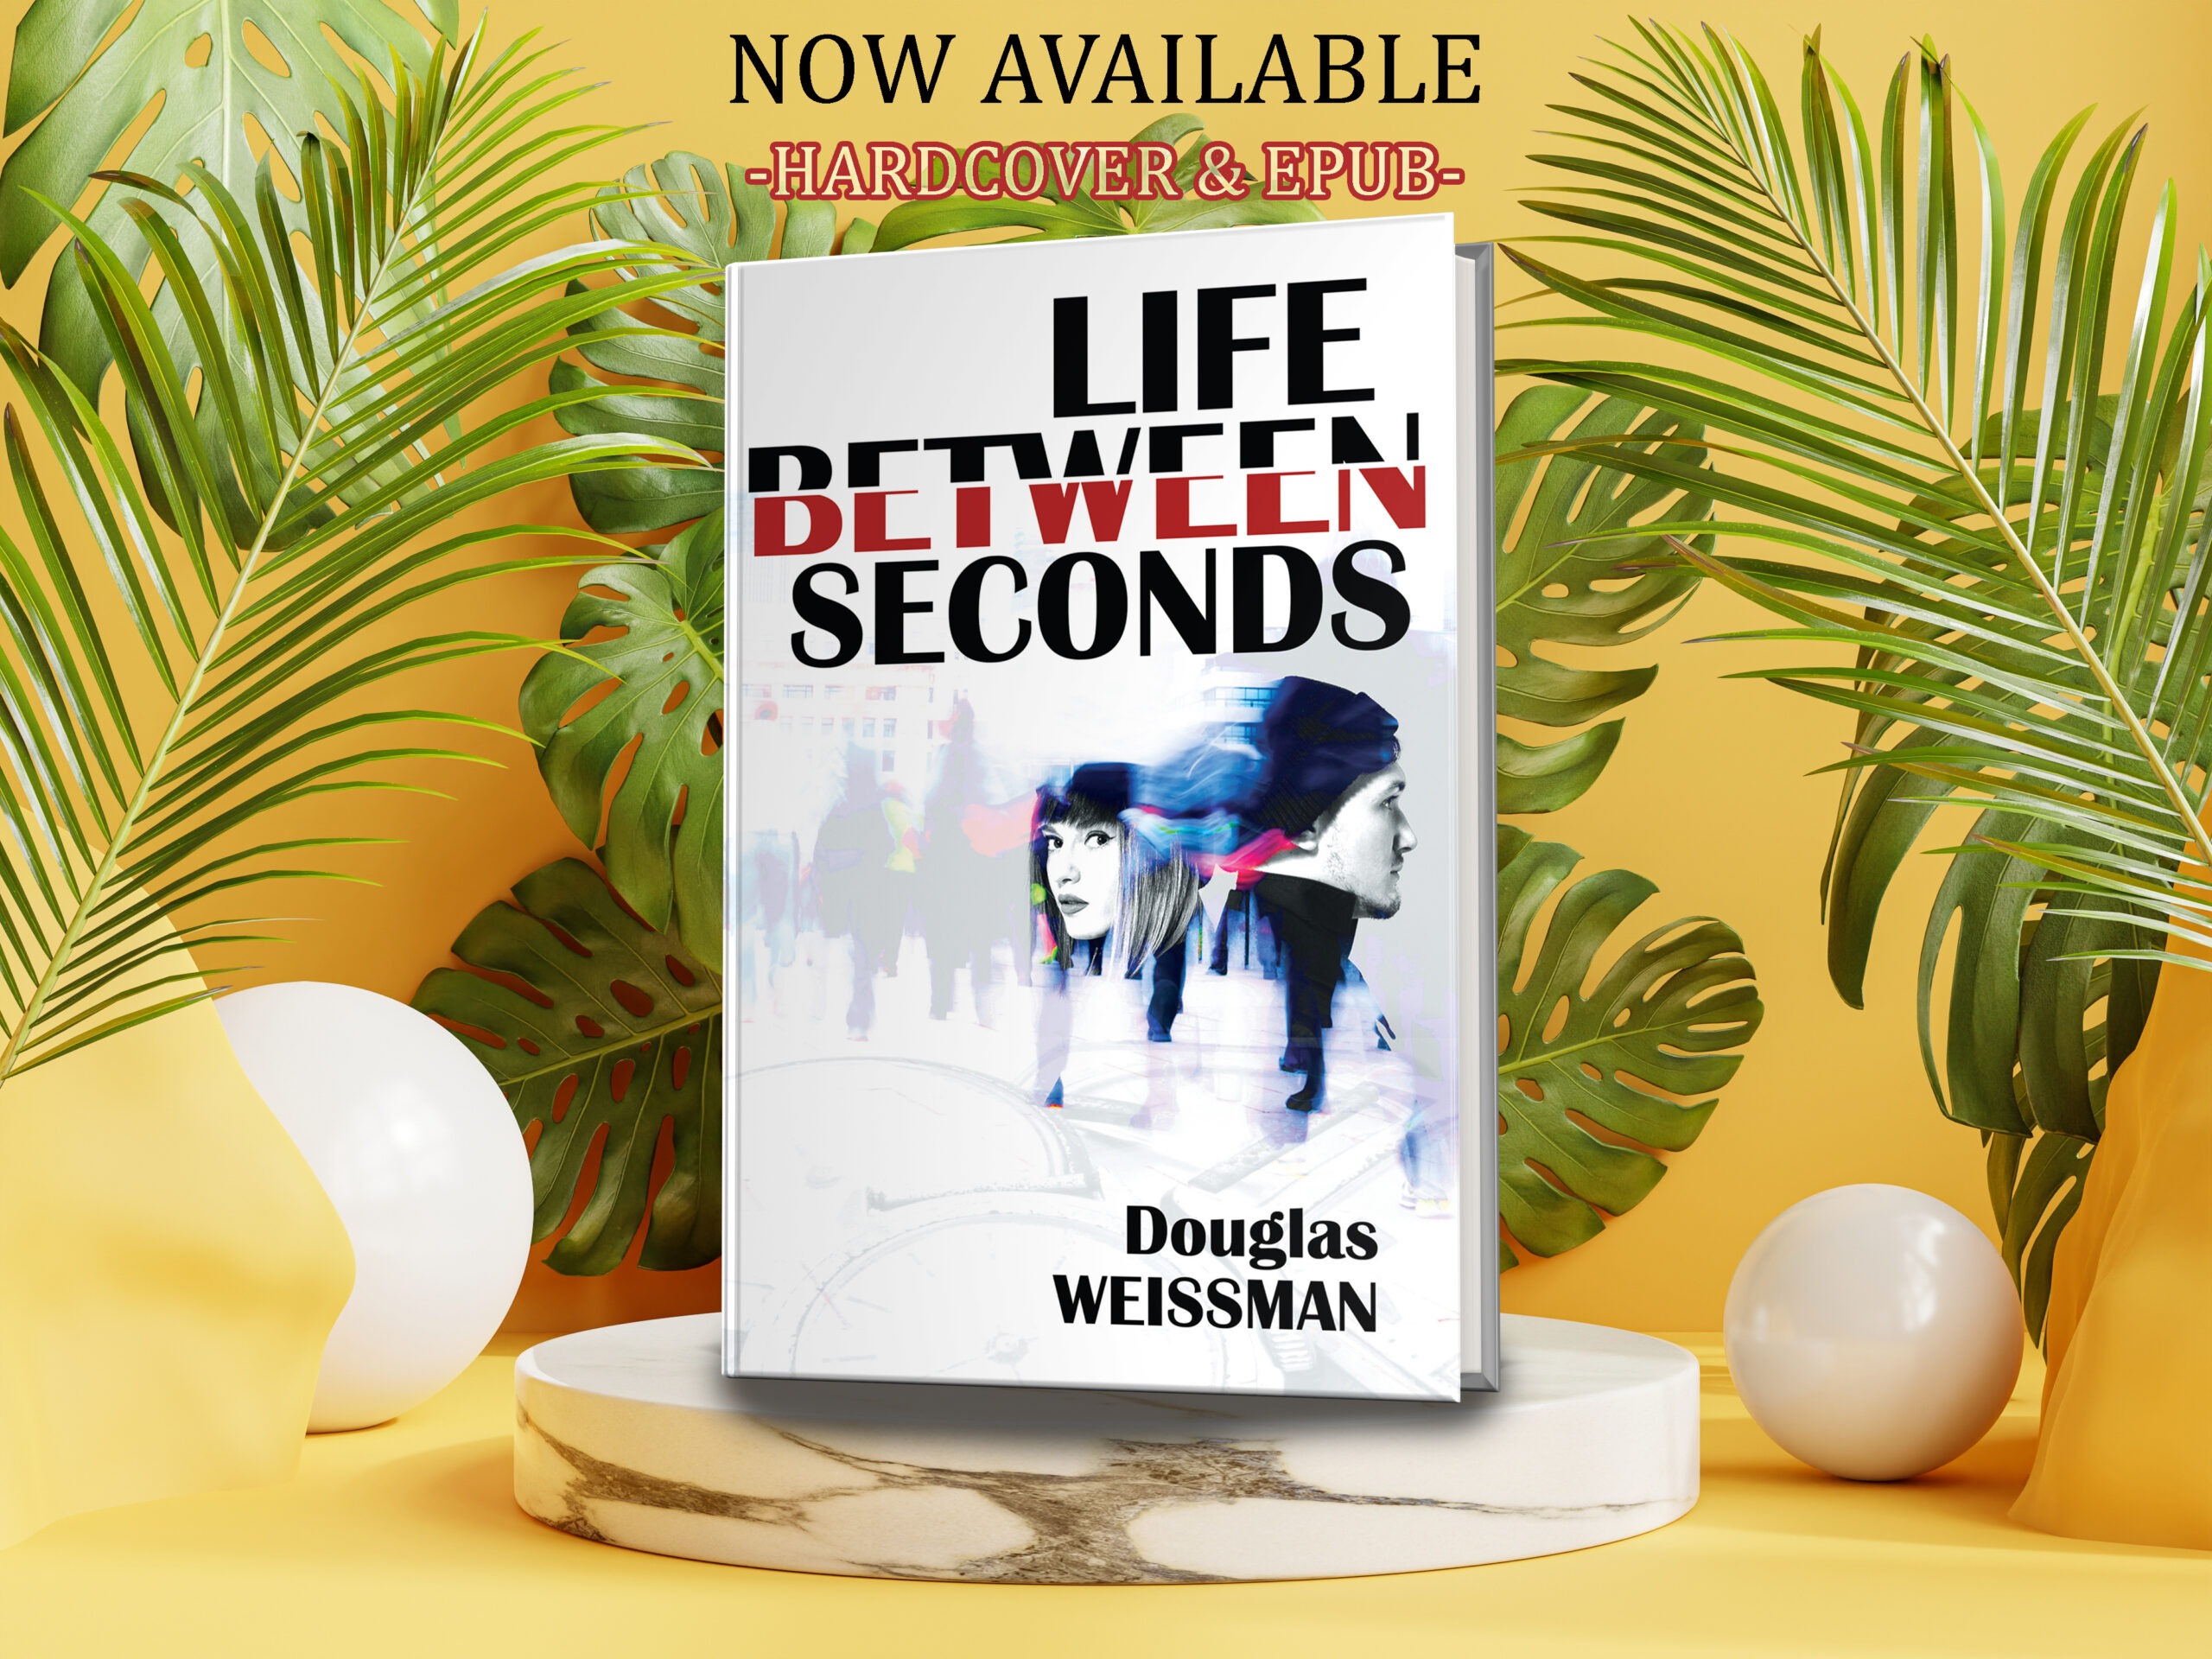 Life Between Seconds by Douglas Weissman now available from Histria Books